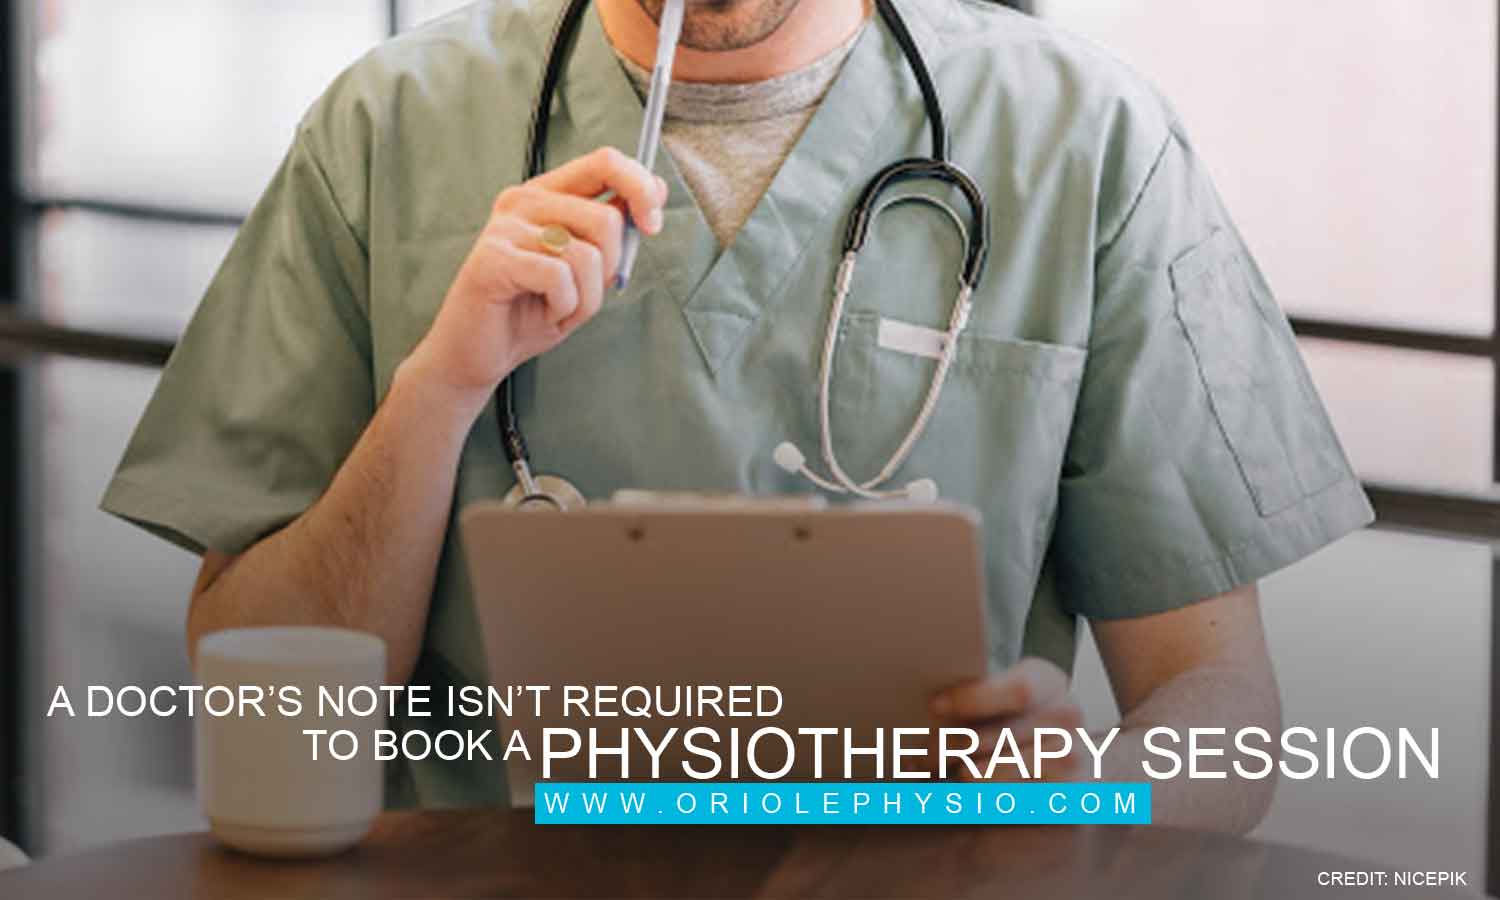 A doctor’s note isn’t required to book a physiotherapy session